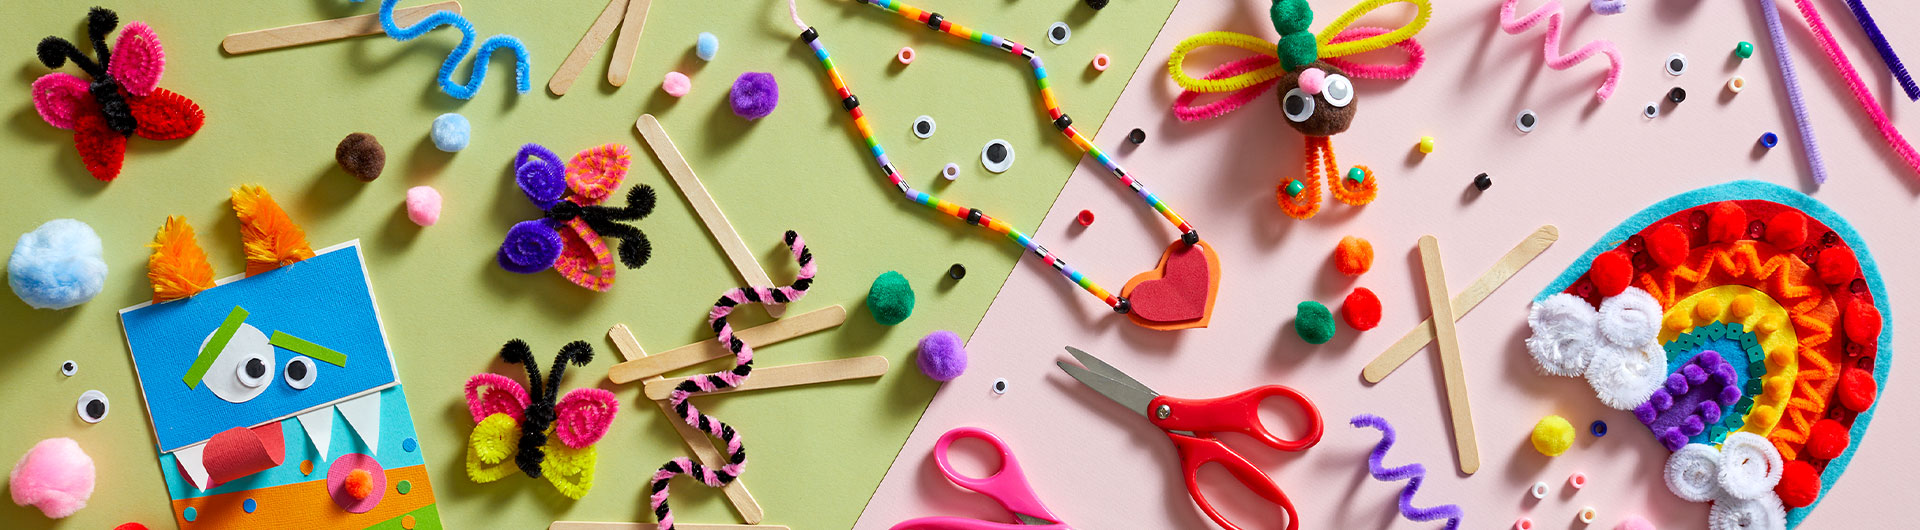 Crafts to keep kids busy